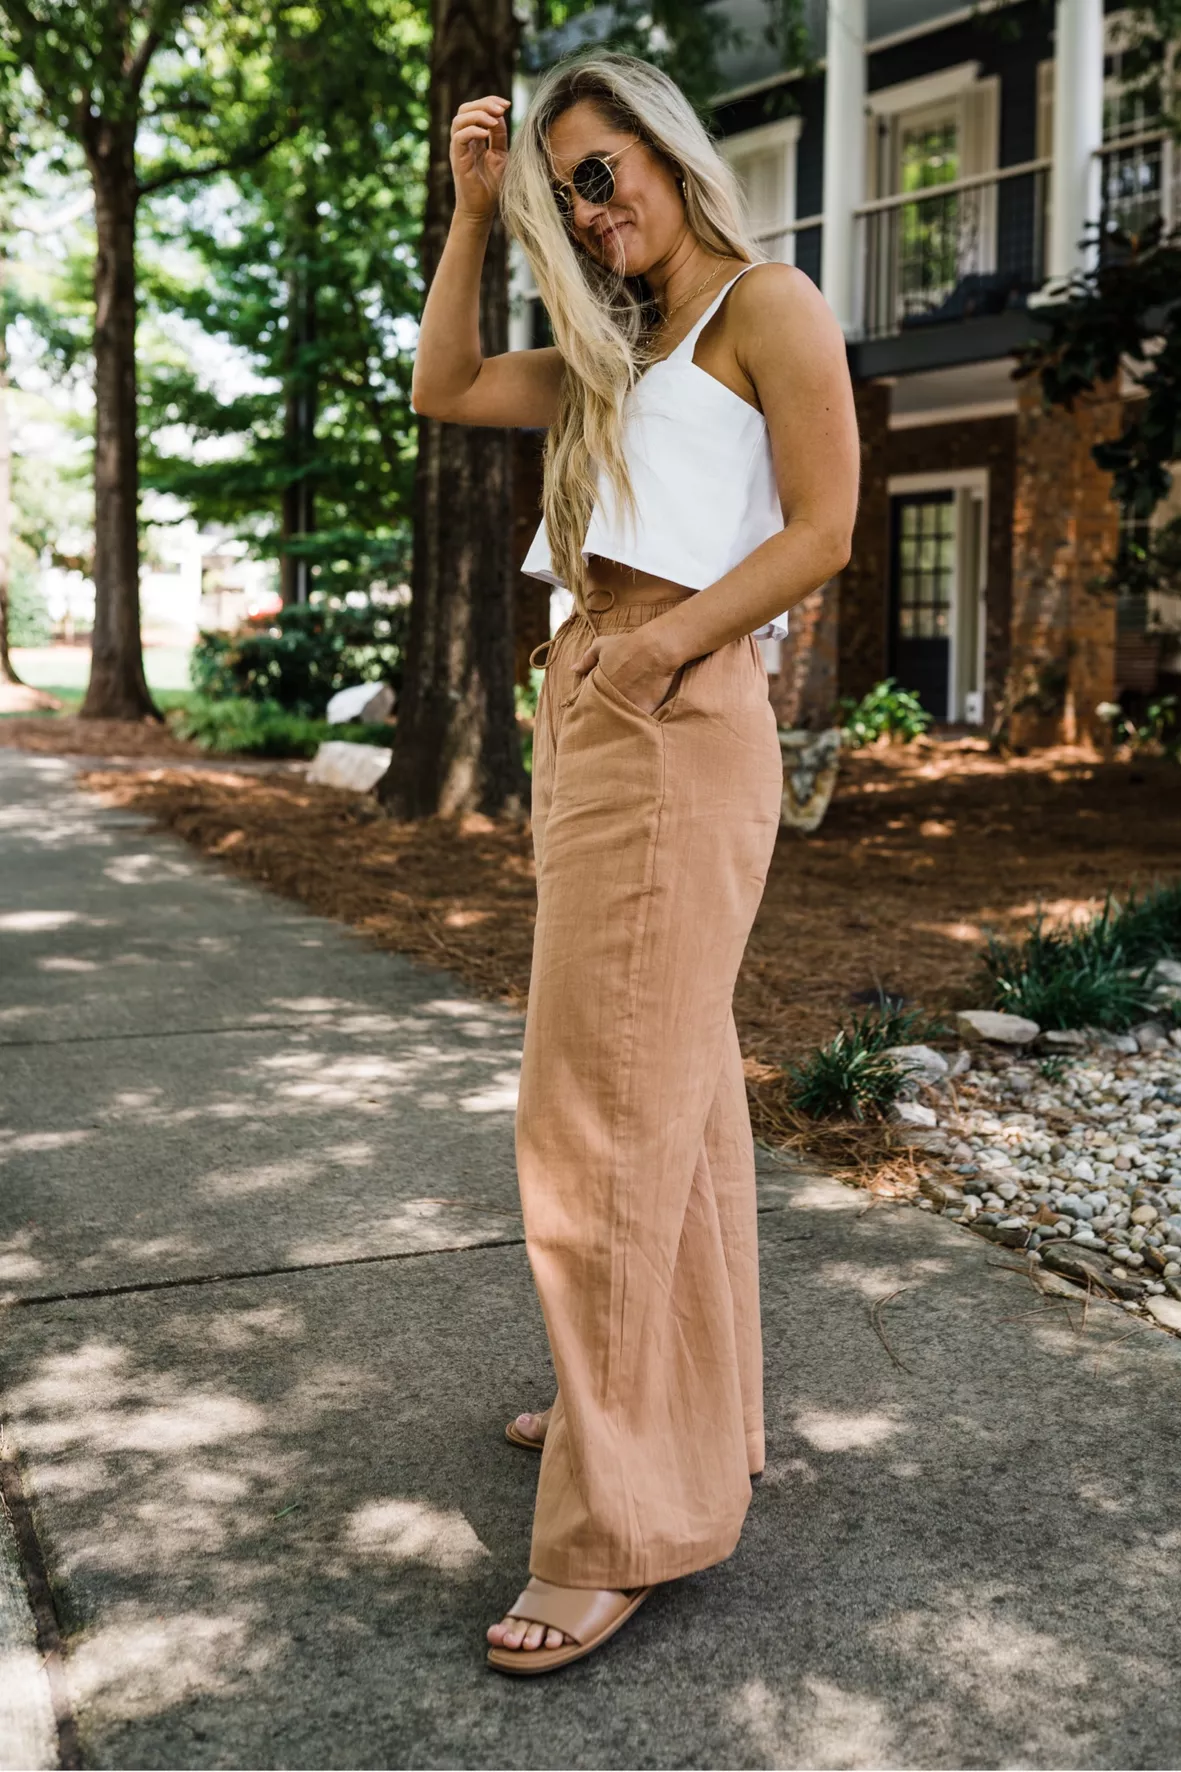 White Linen Blouse with Beige Wide Leg Trousers